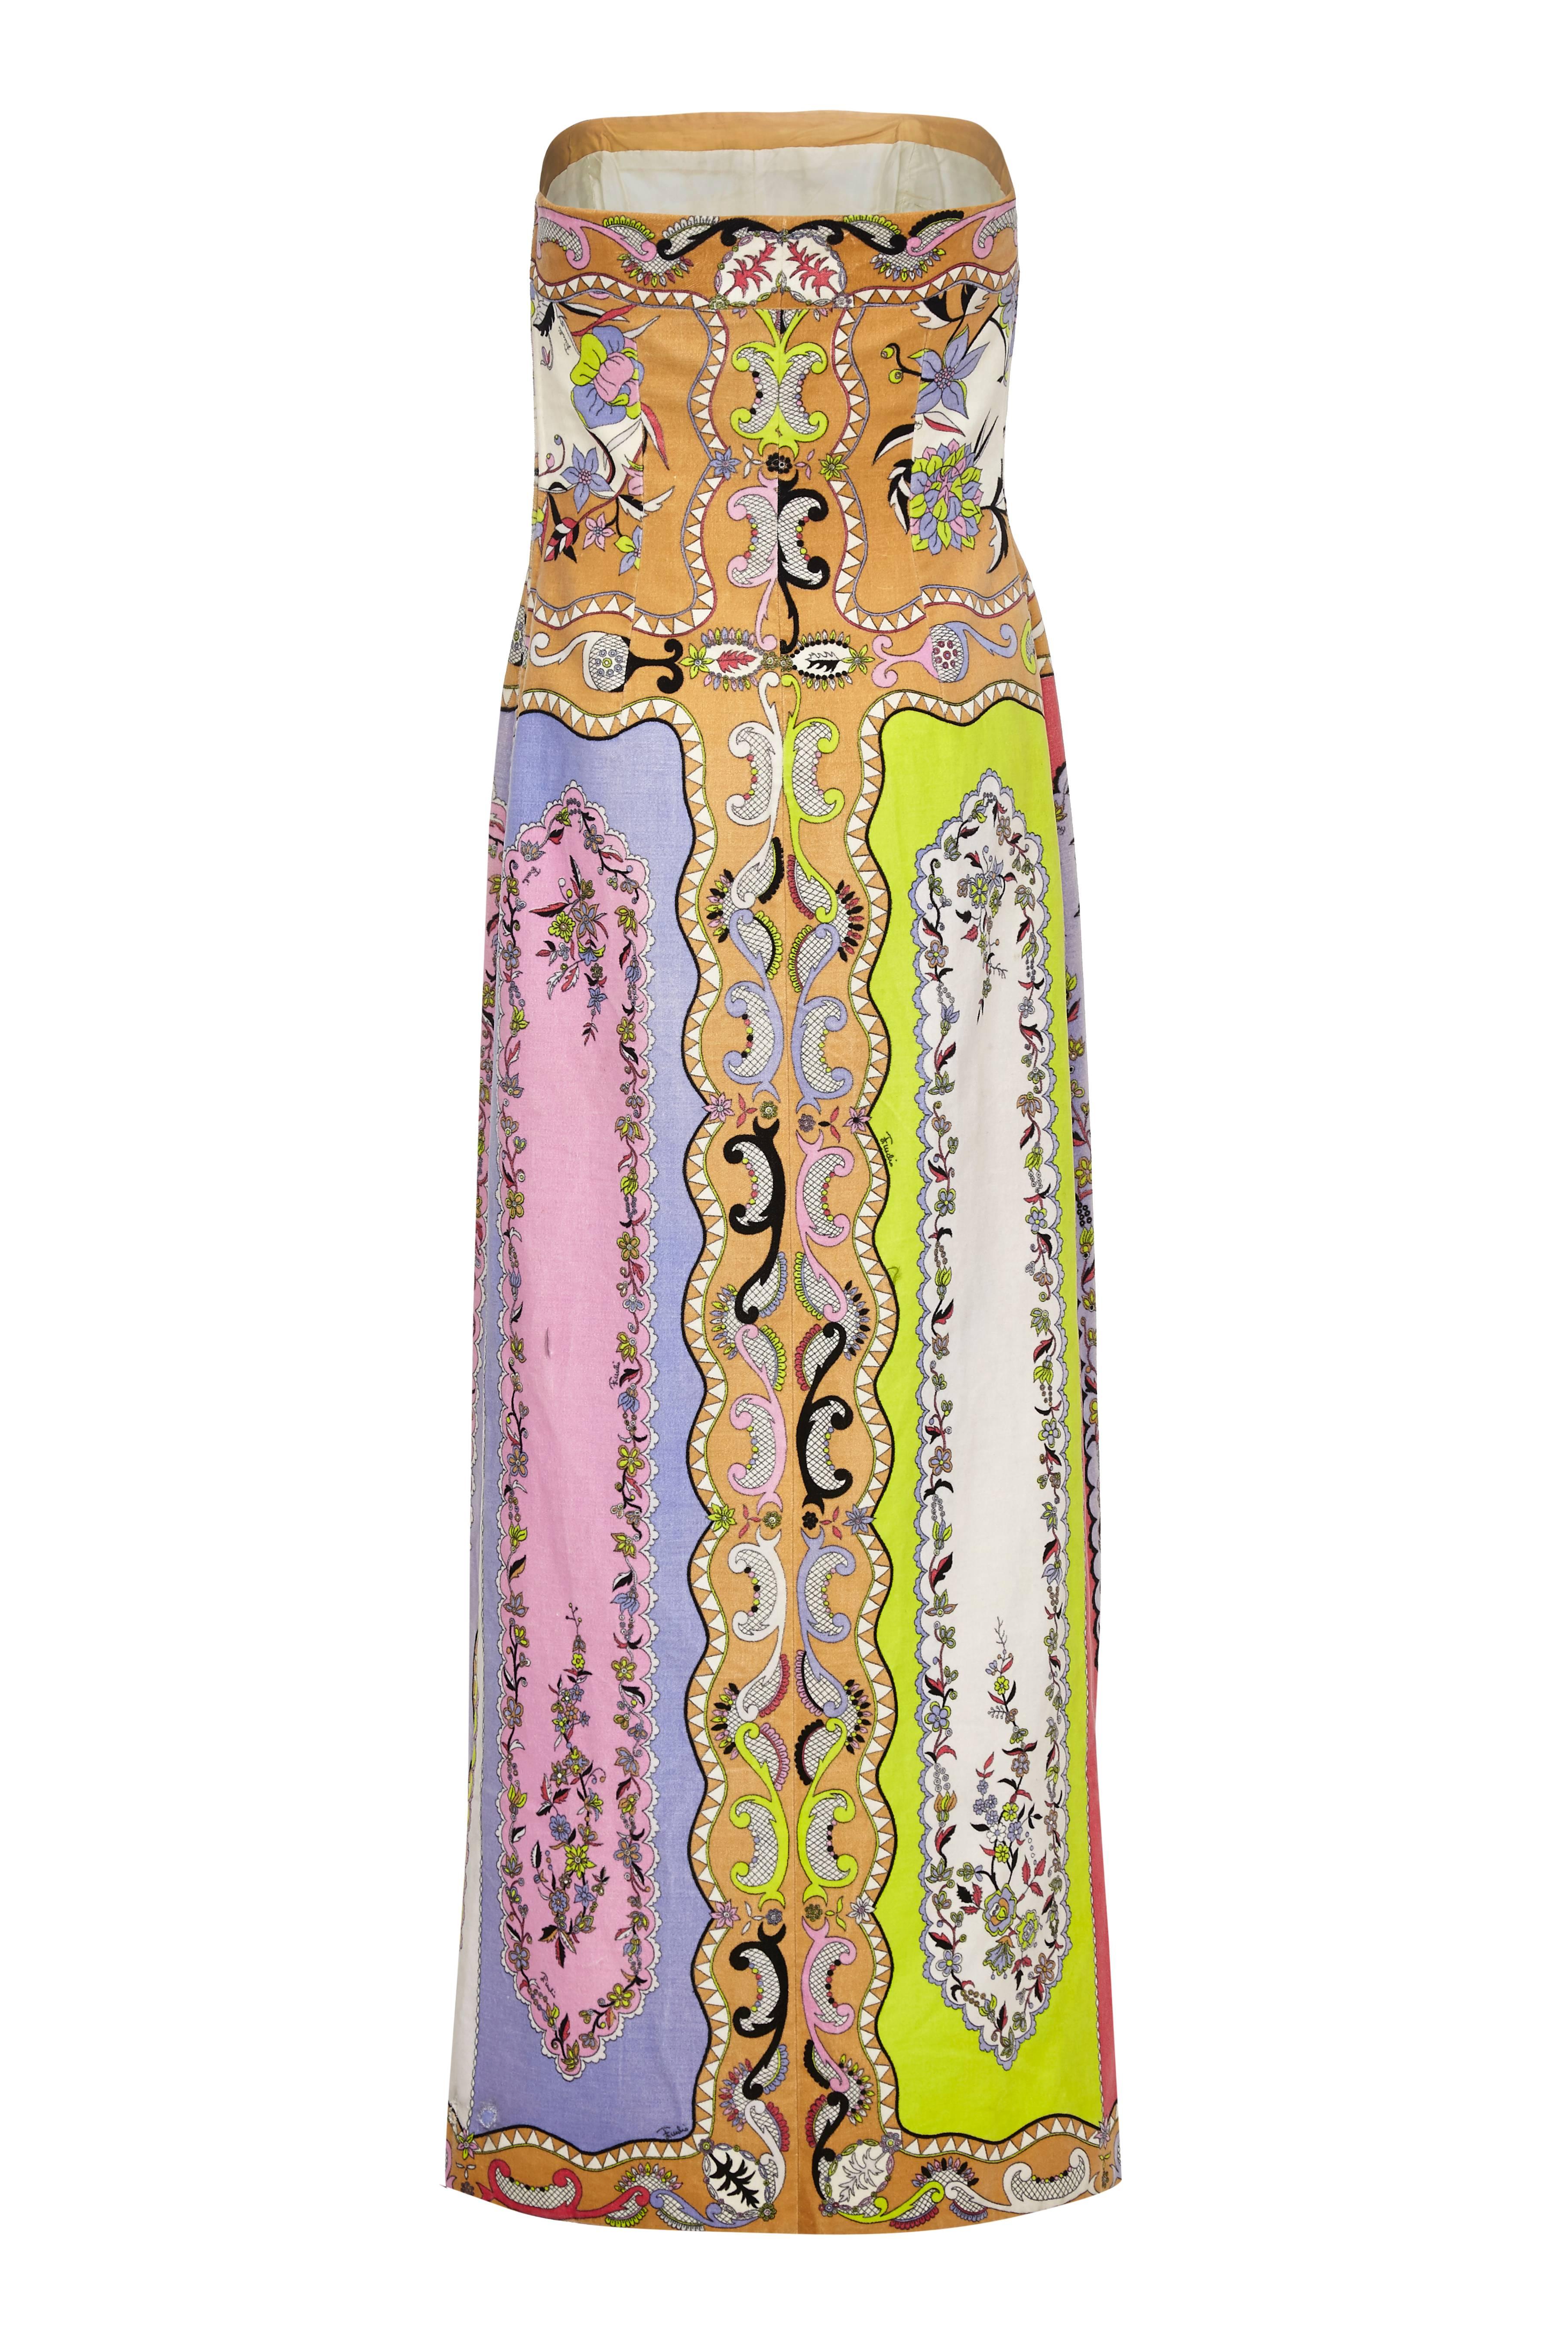 Fantastic vintage early 1970s Emilio Pucci velvet bustier dress with multi-coloured floral and panelled pattern.  This strapless gown is beautifully made with internal boning for support and a zip fastening at the side. A rare collectors item in